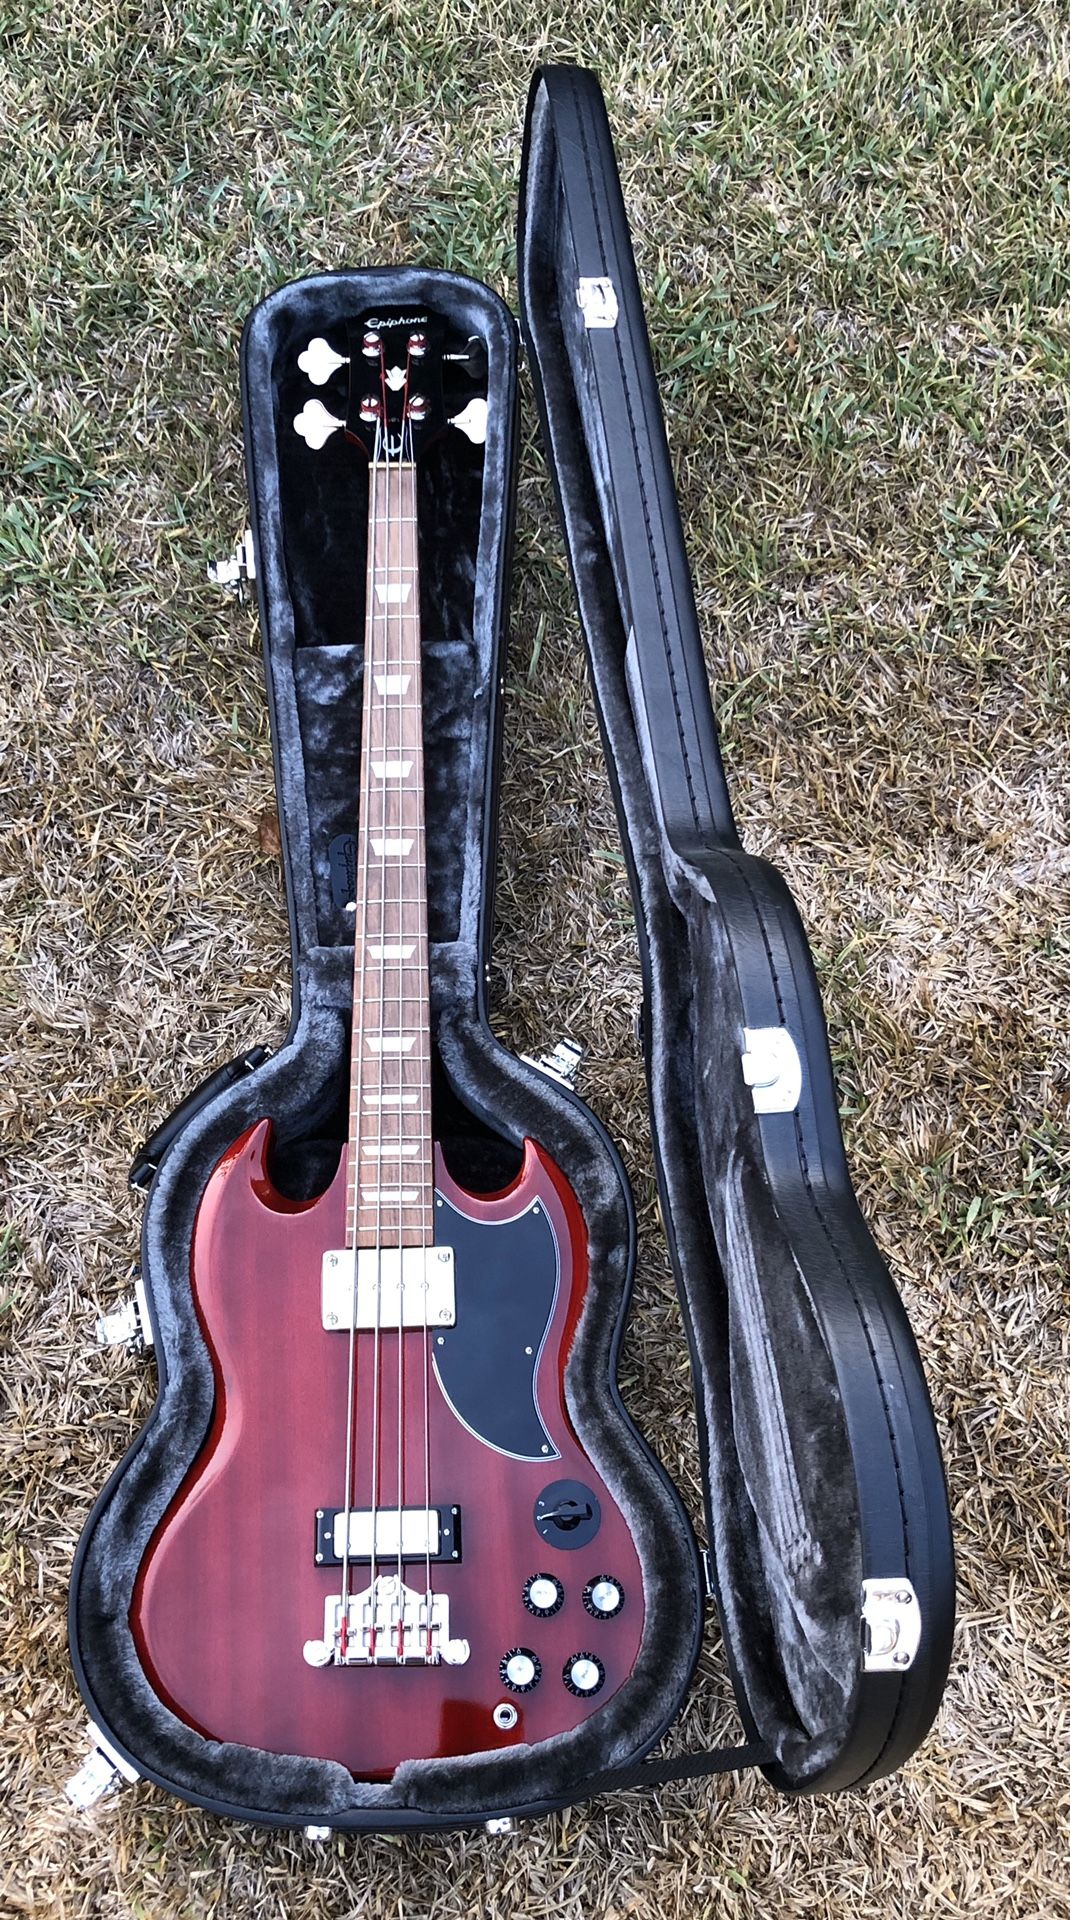 Epiphone EB3 Bass Guitar With Epiphone Hard Shell Case